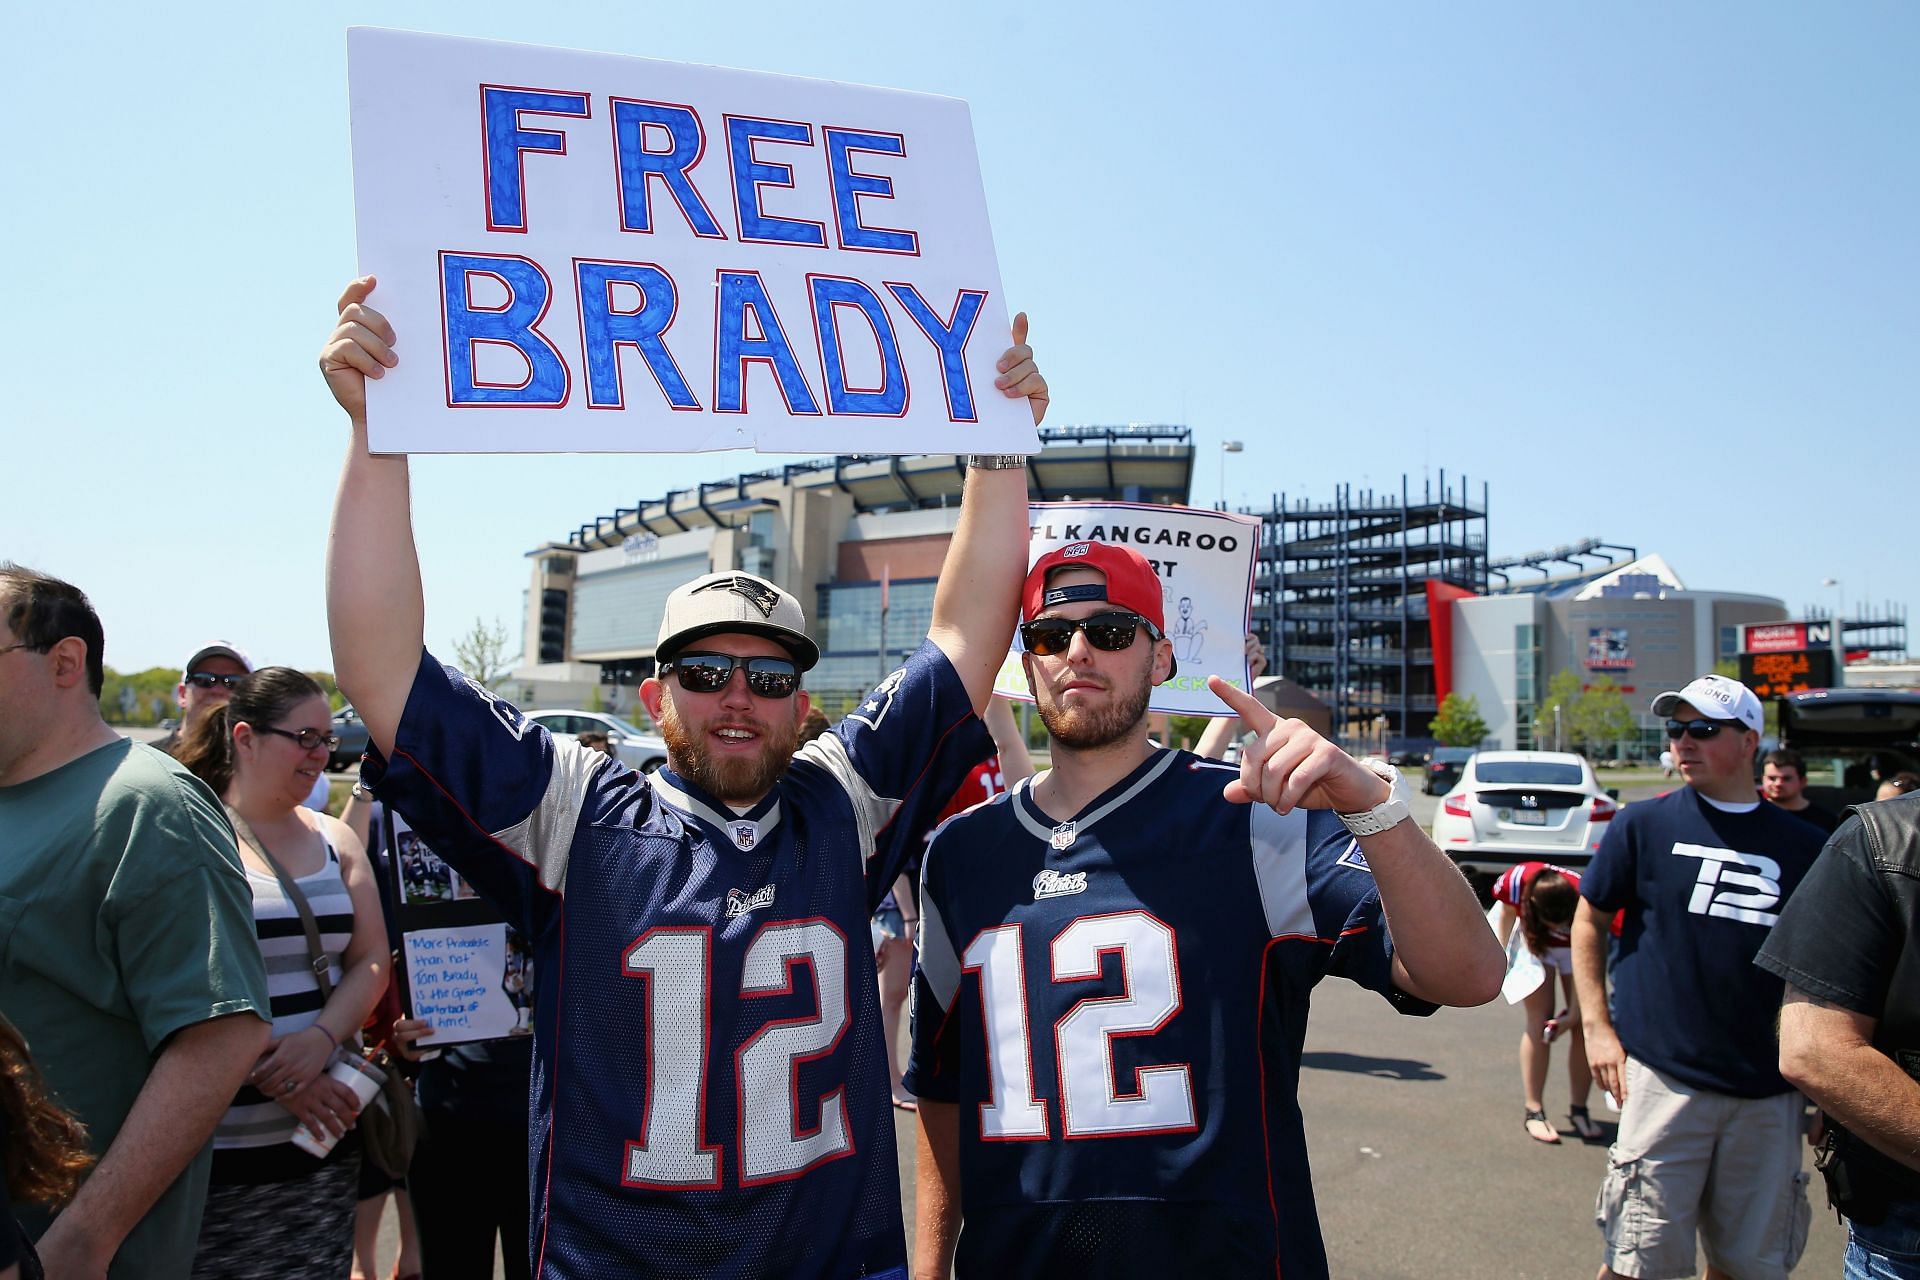 Fans Attend rally in support of Patriots QB